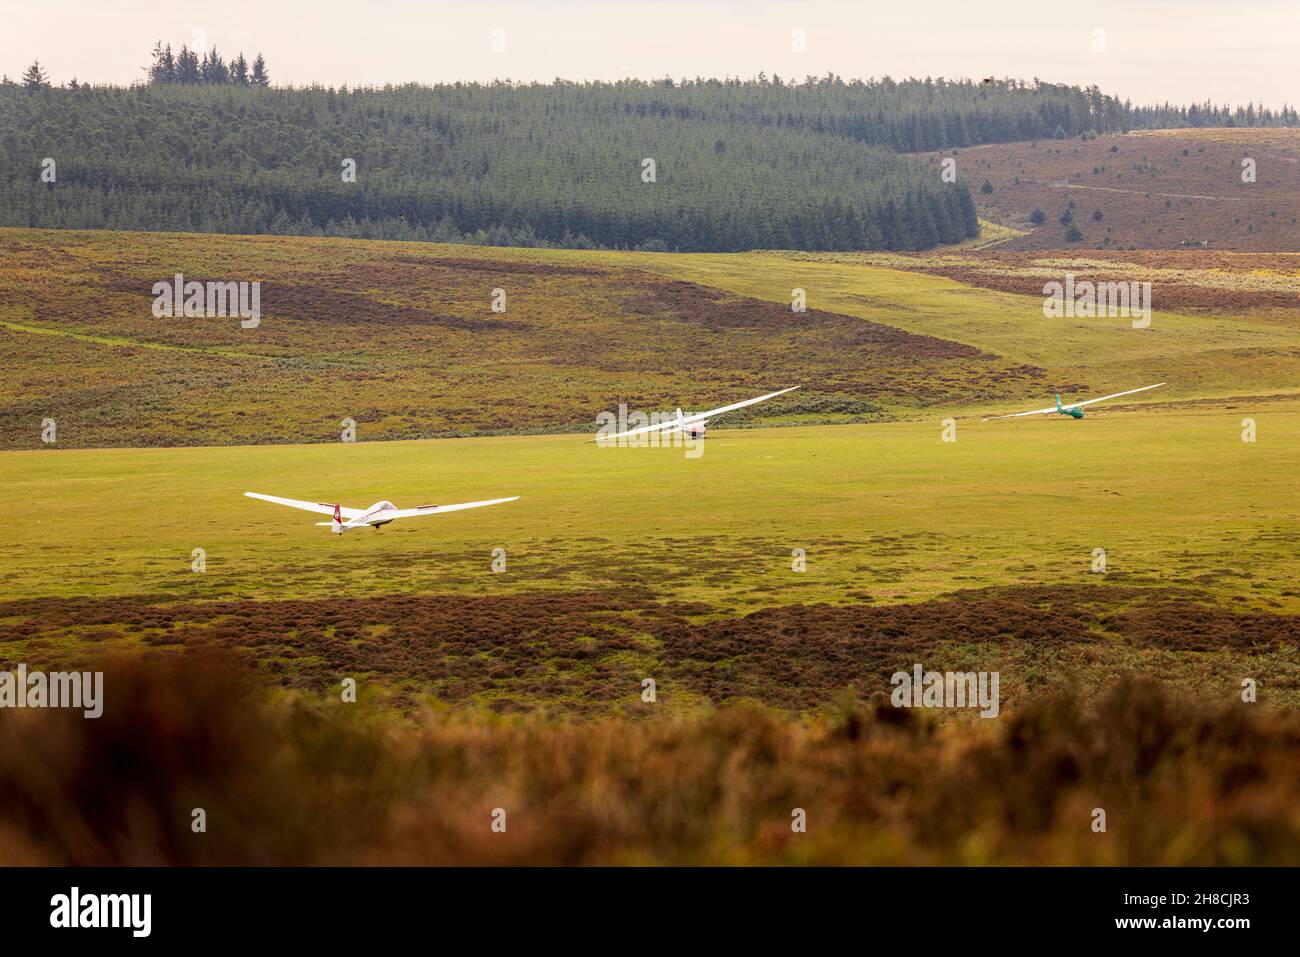 Gliders at the Midland Gliding Club on the Heathland, Long Mynd, Shropshire Hills, area of natural beauty, England Stock Photo